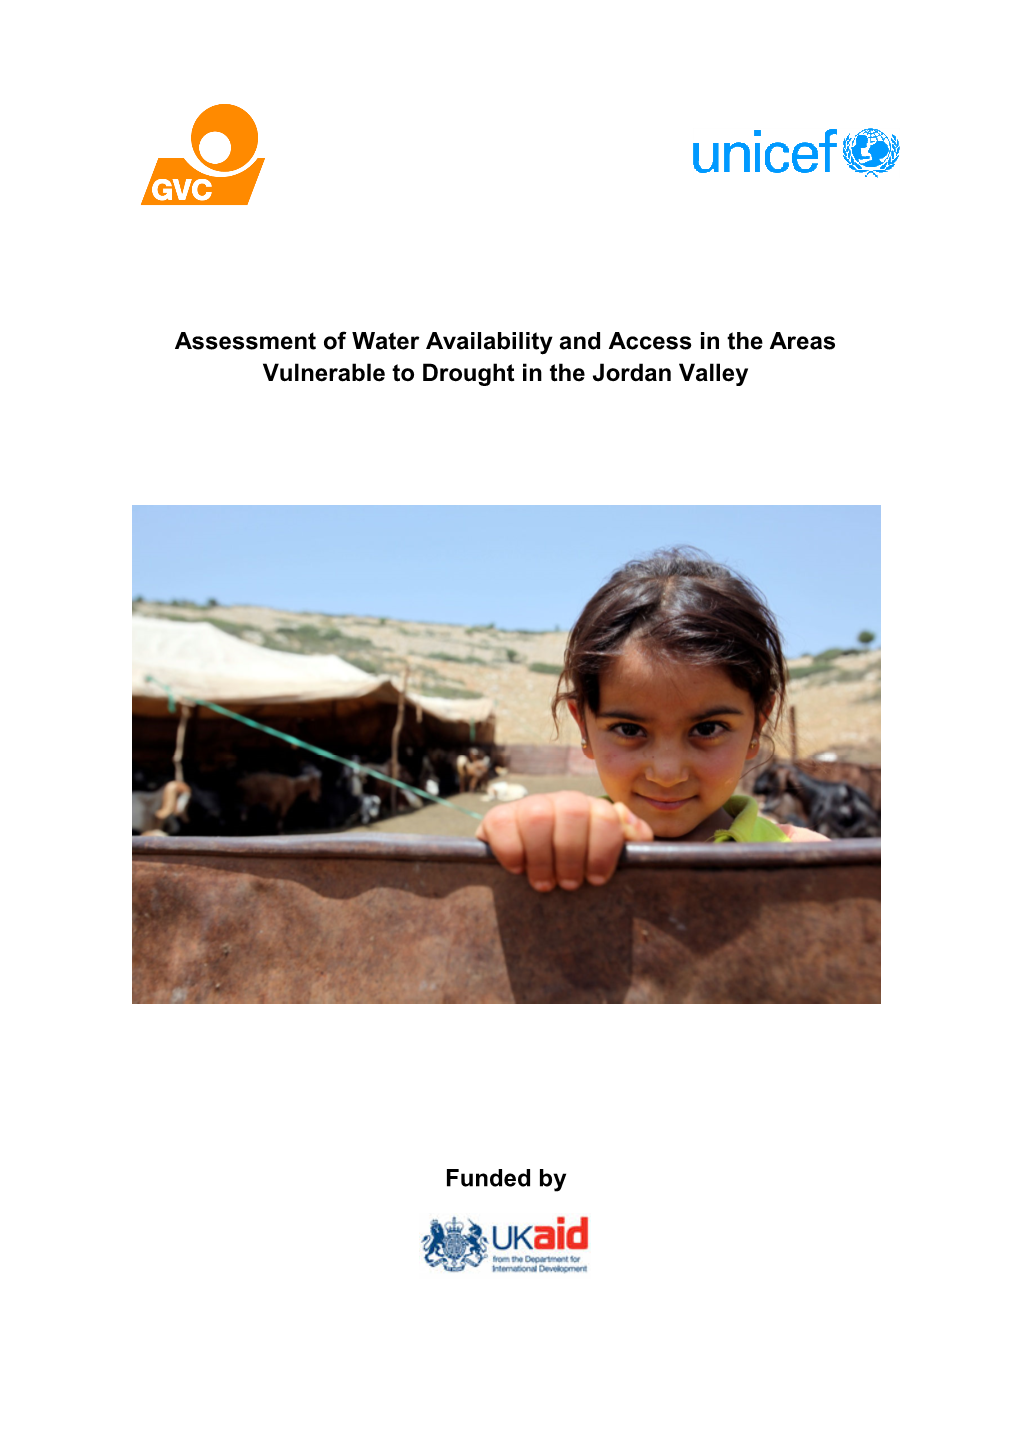 Assessment of Water Availability and Access in the Areas Vulnerable to Drought in the Jordan Valley